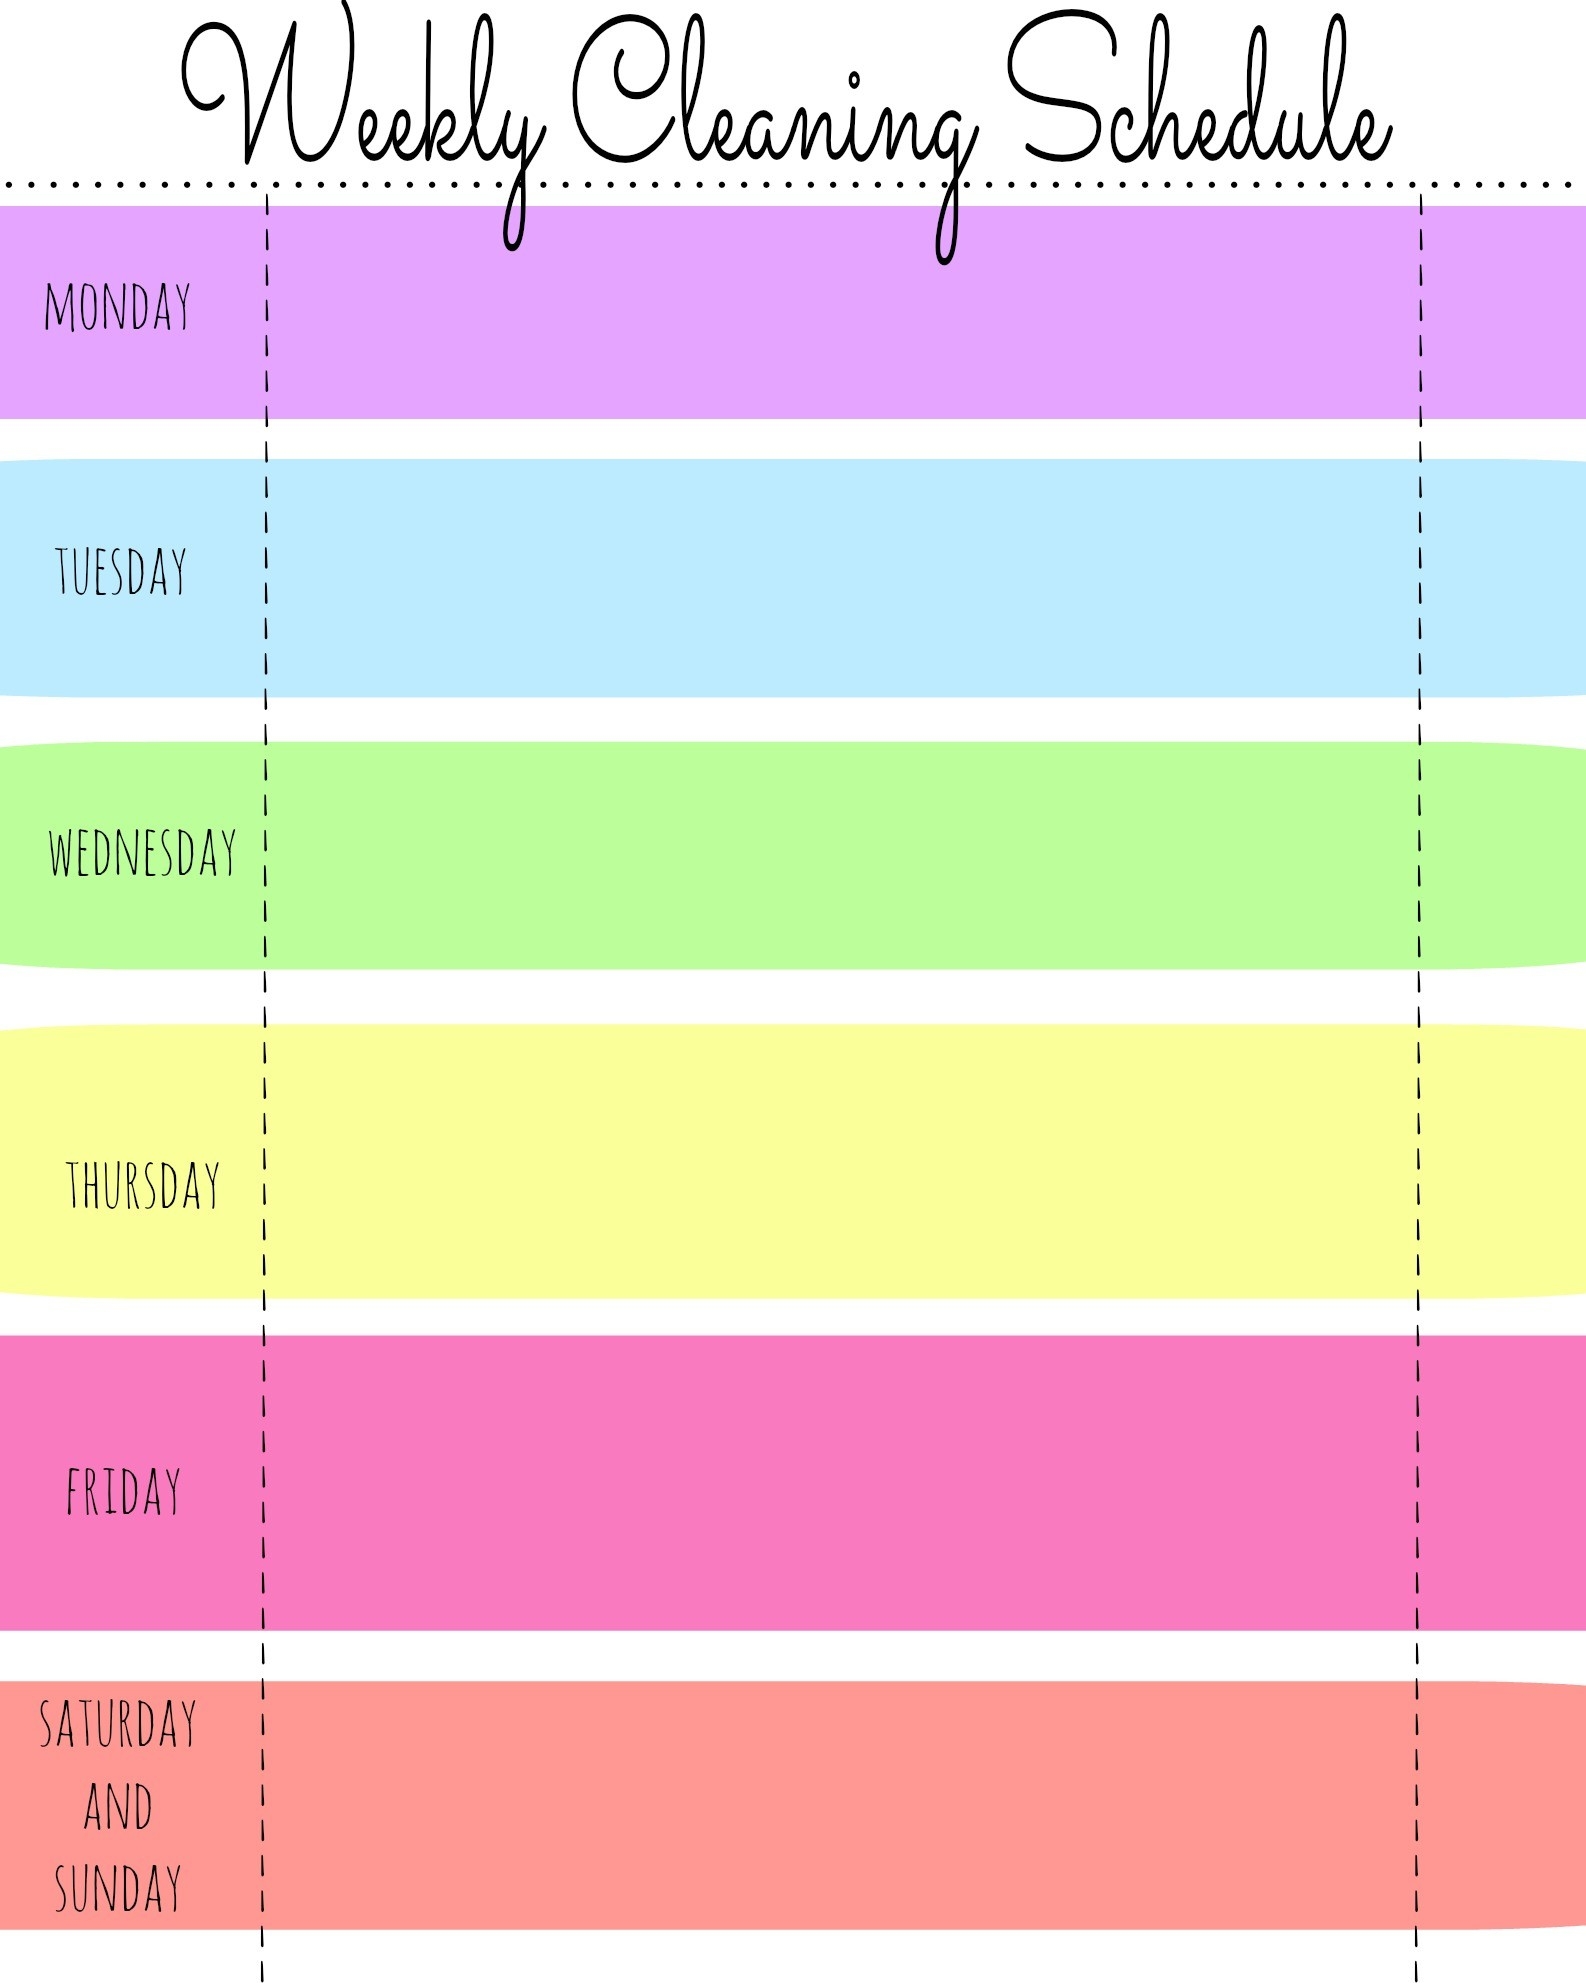 My Quirky Weekly Cleaning Chart: Free Printable - First Home-Clean Template Monday To Firday